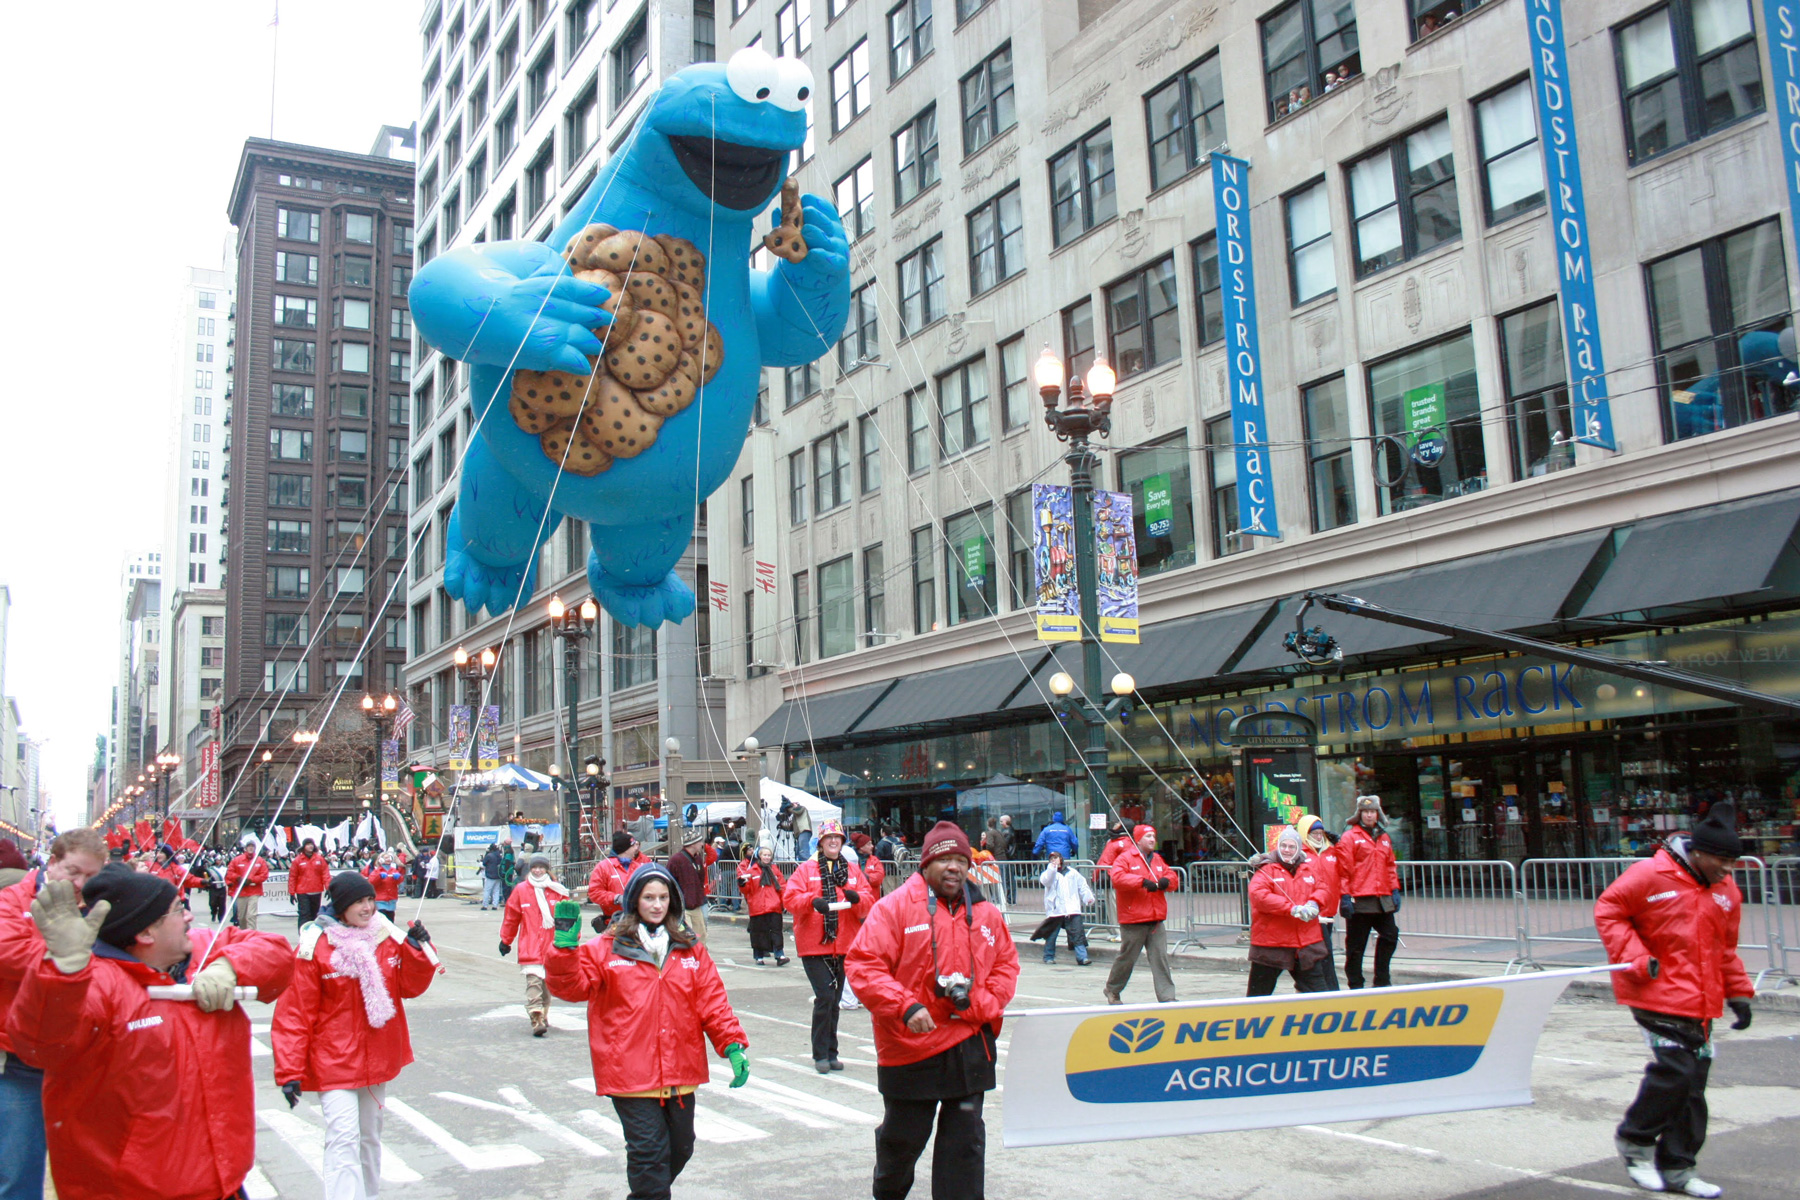 Cookie Monster is one of the many high-flying inflatable balloons making its way back to the Chicago Thanksgiving Parade